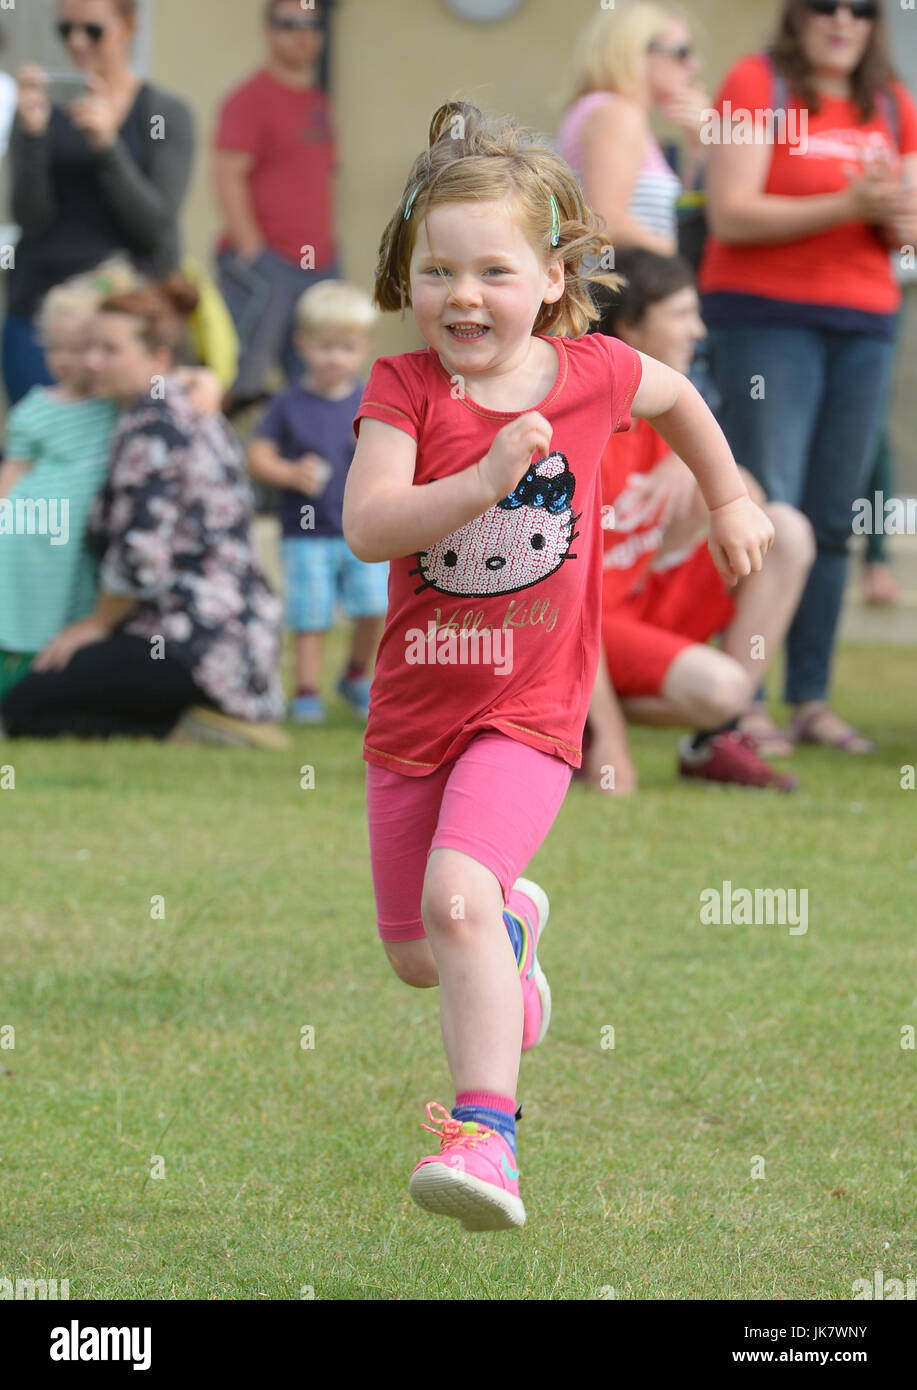 Girl running during school sports day Stock Photo